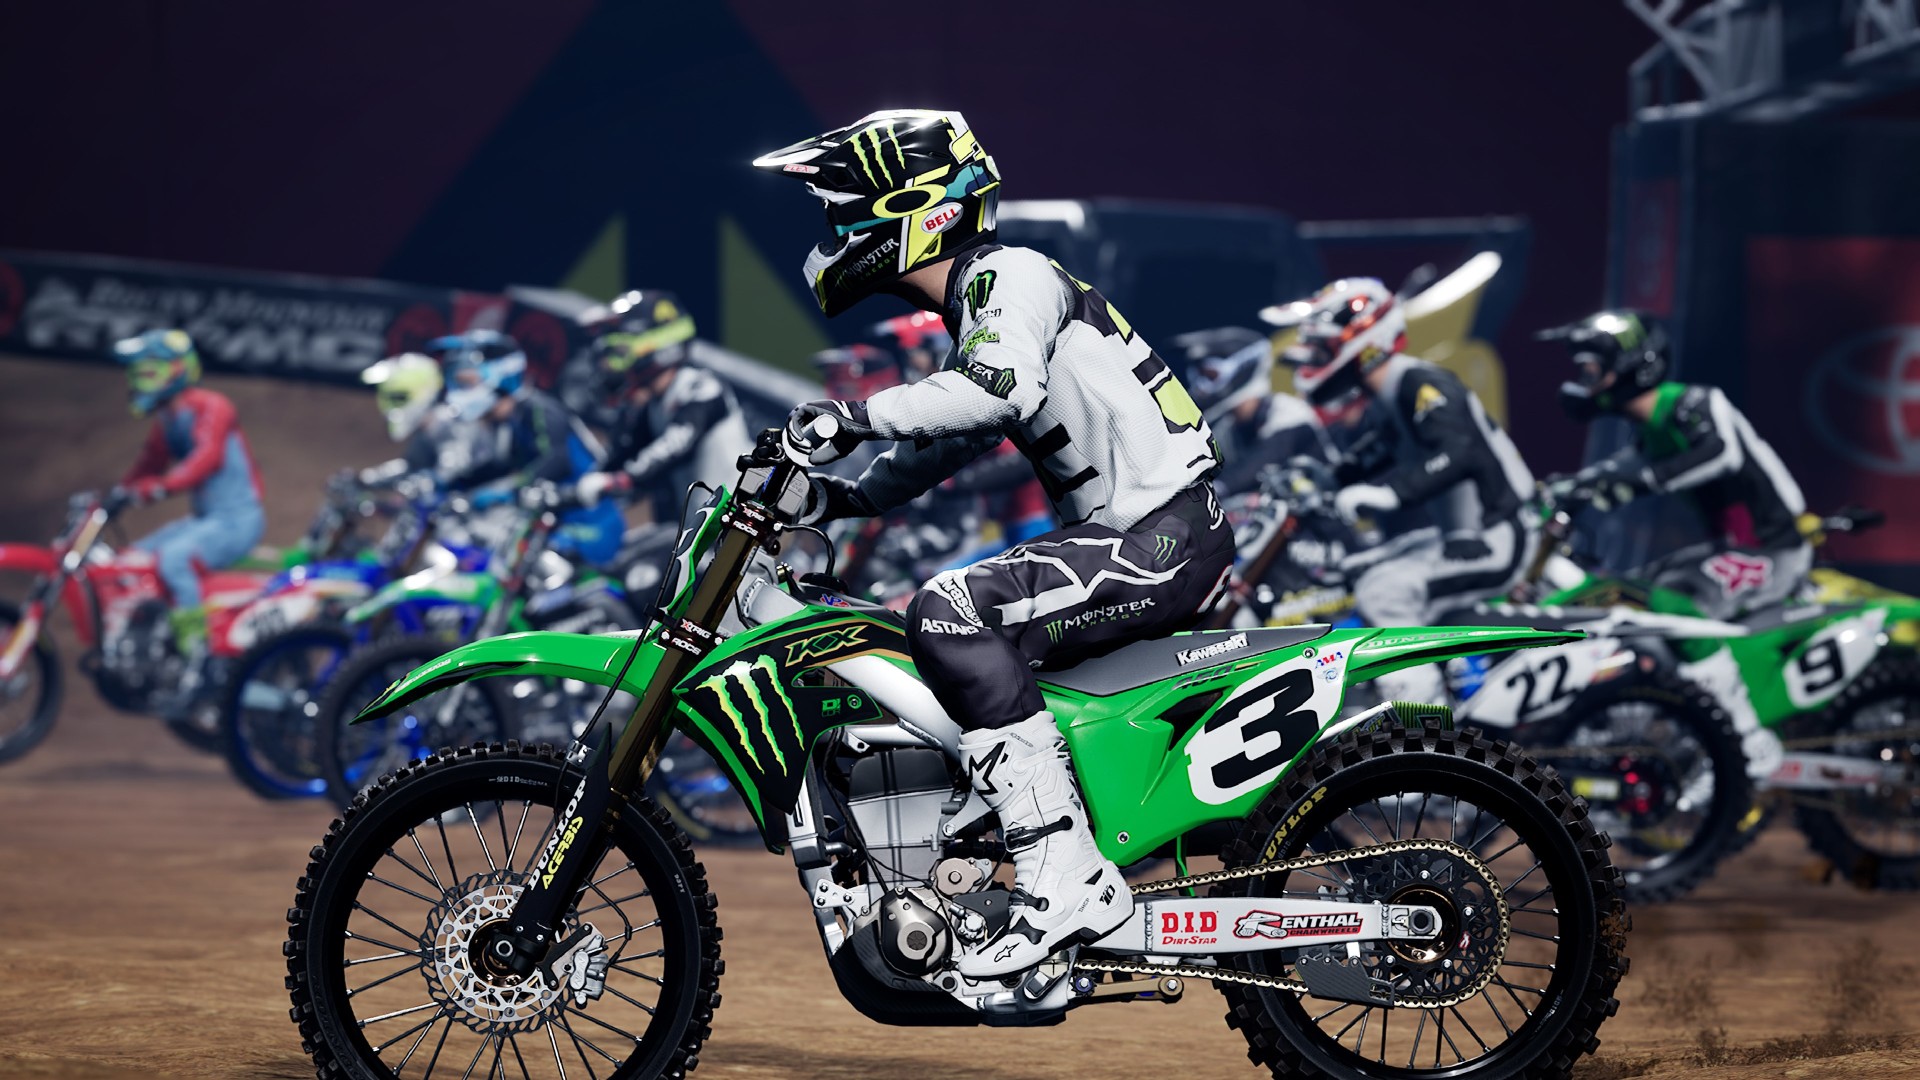 Next Week on Xbox: Neue Spiele vom 8. bis 12. März: Monster Energy Supercross - The Official Videogame 4